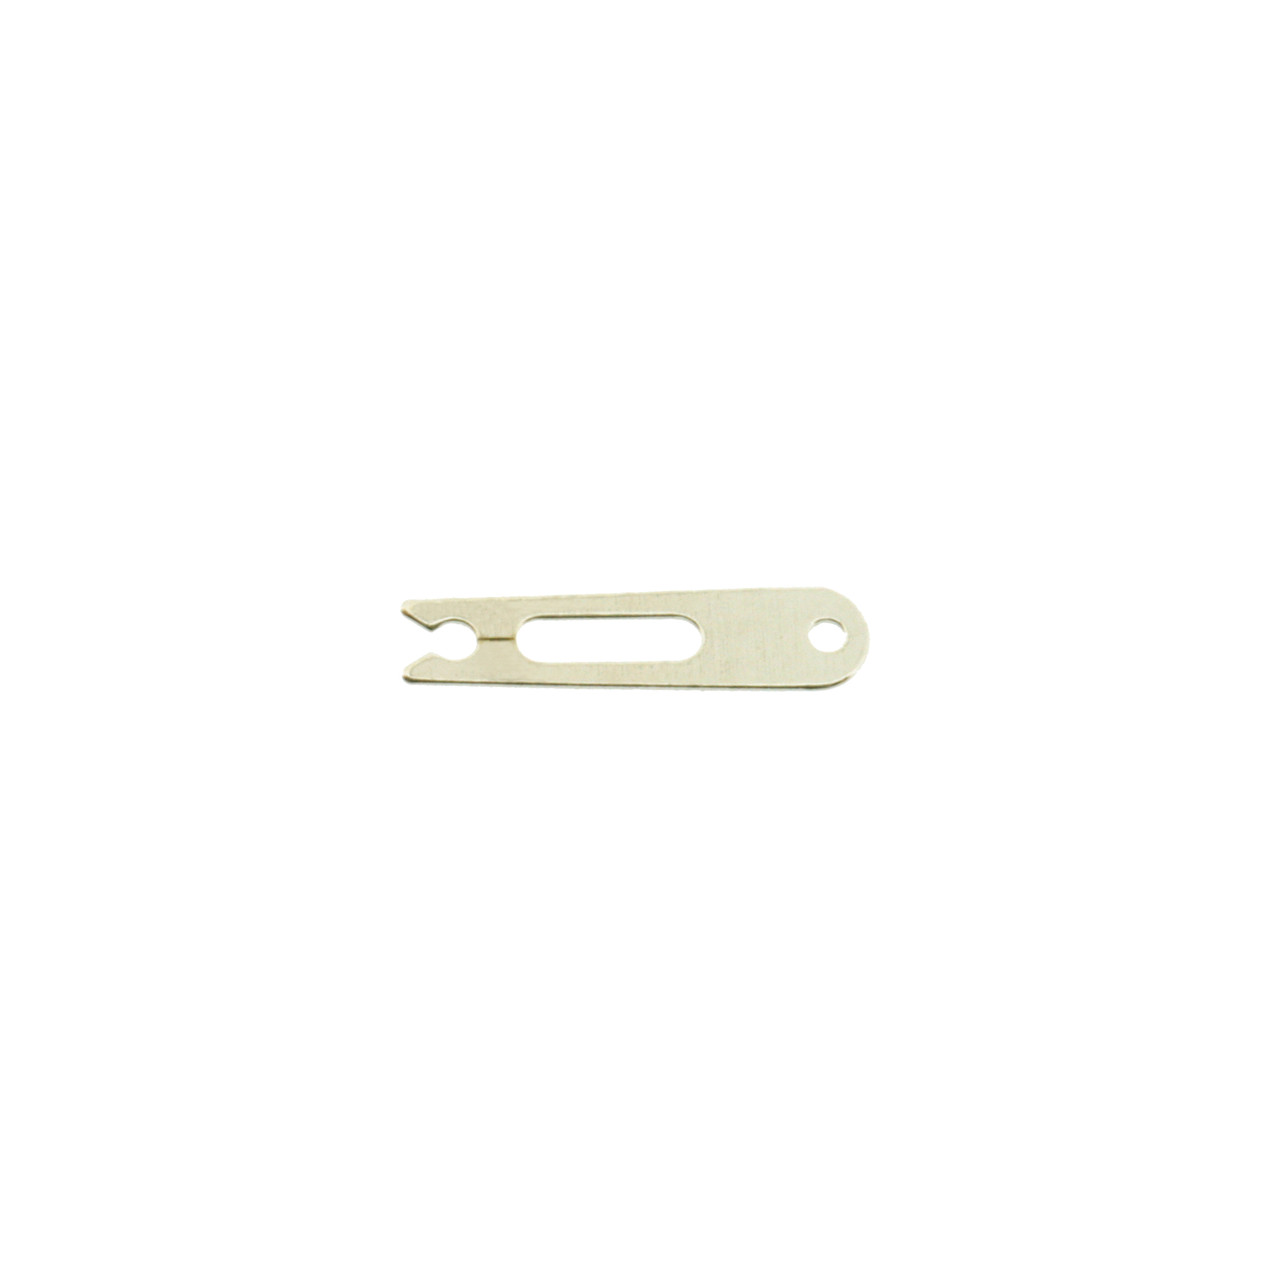 Spring Clip for Oscillating Weight - Main